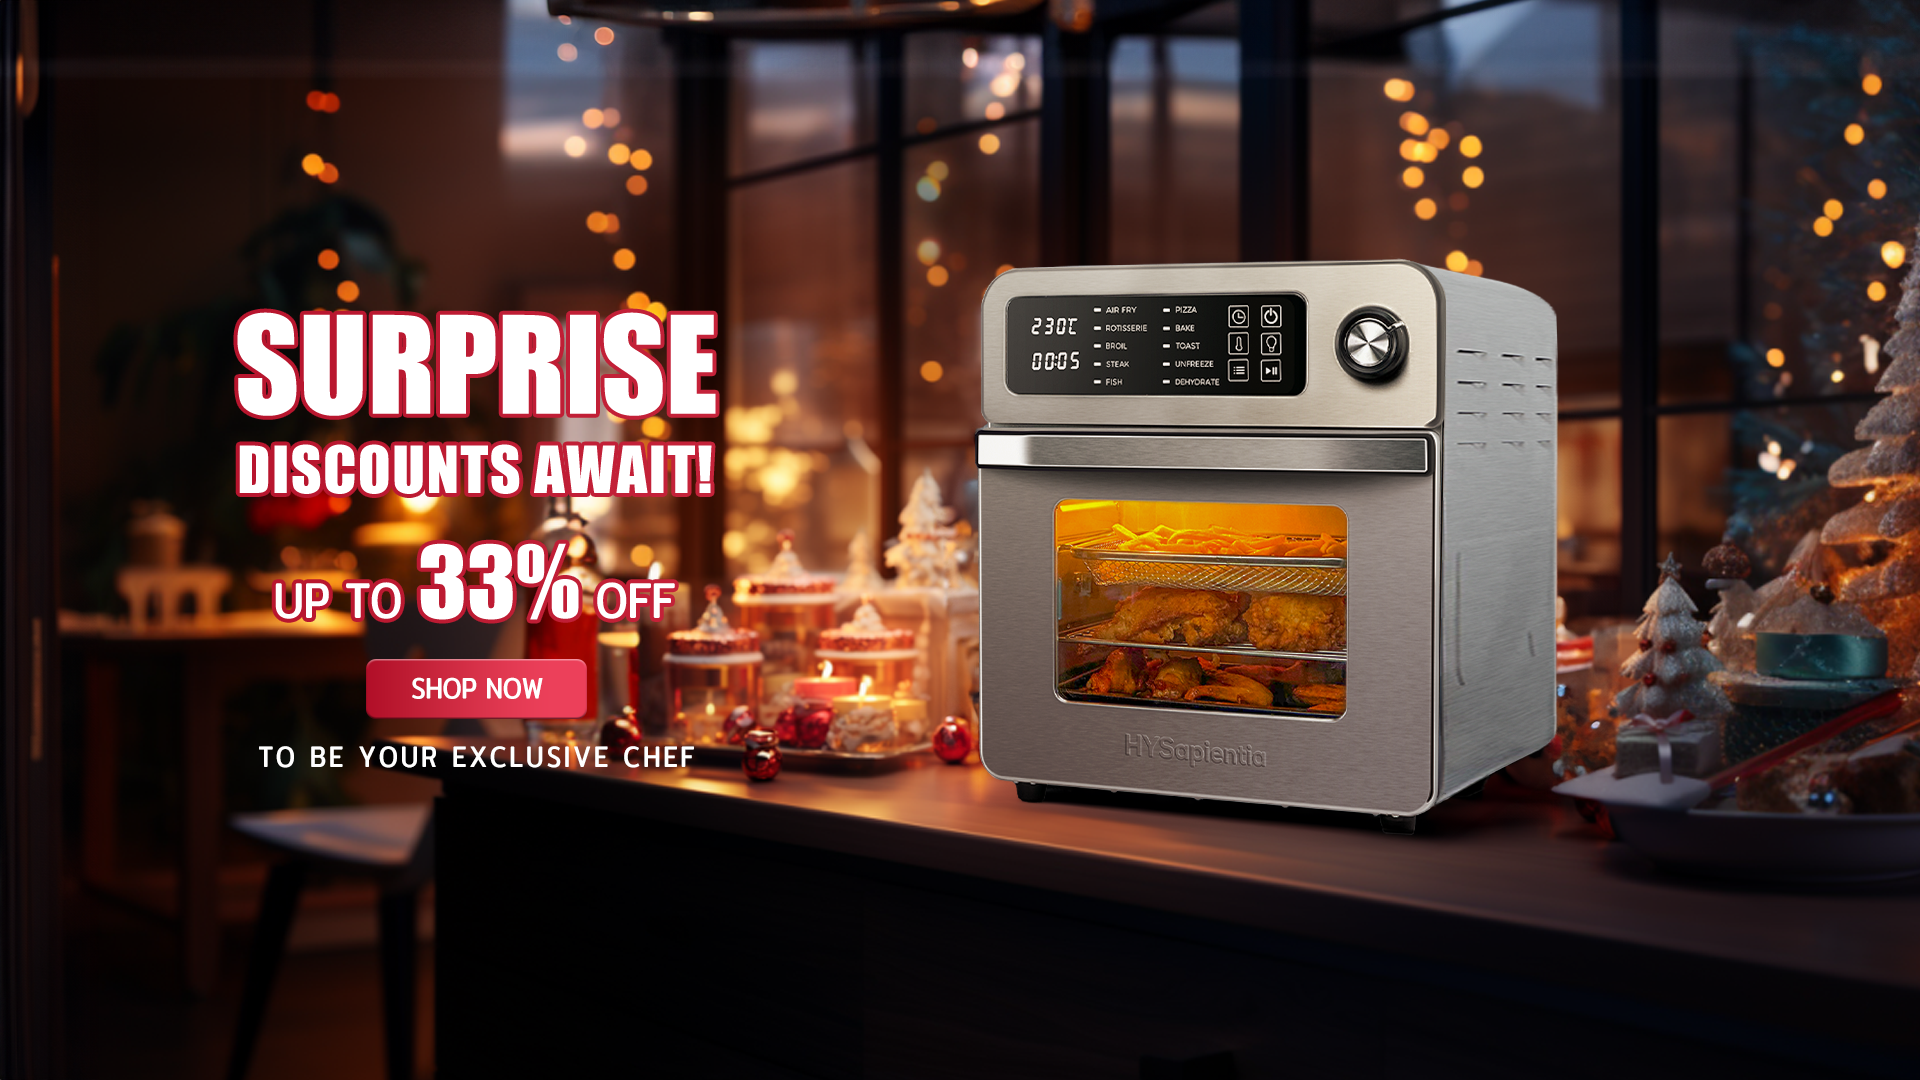 HYSapientia 24 Litre Air Fryer Oven FAMILY SIZE with Rotisserie